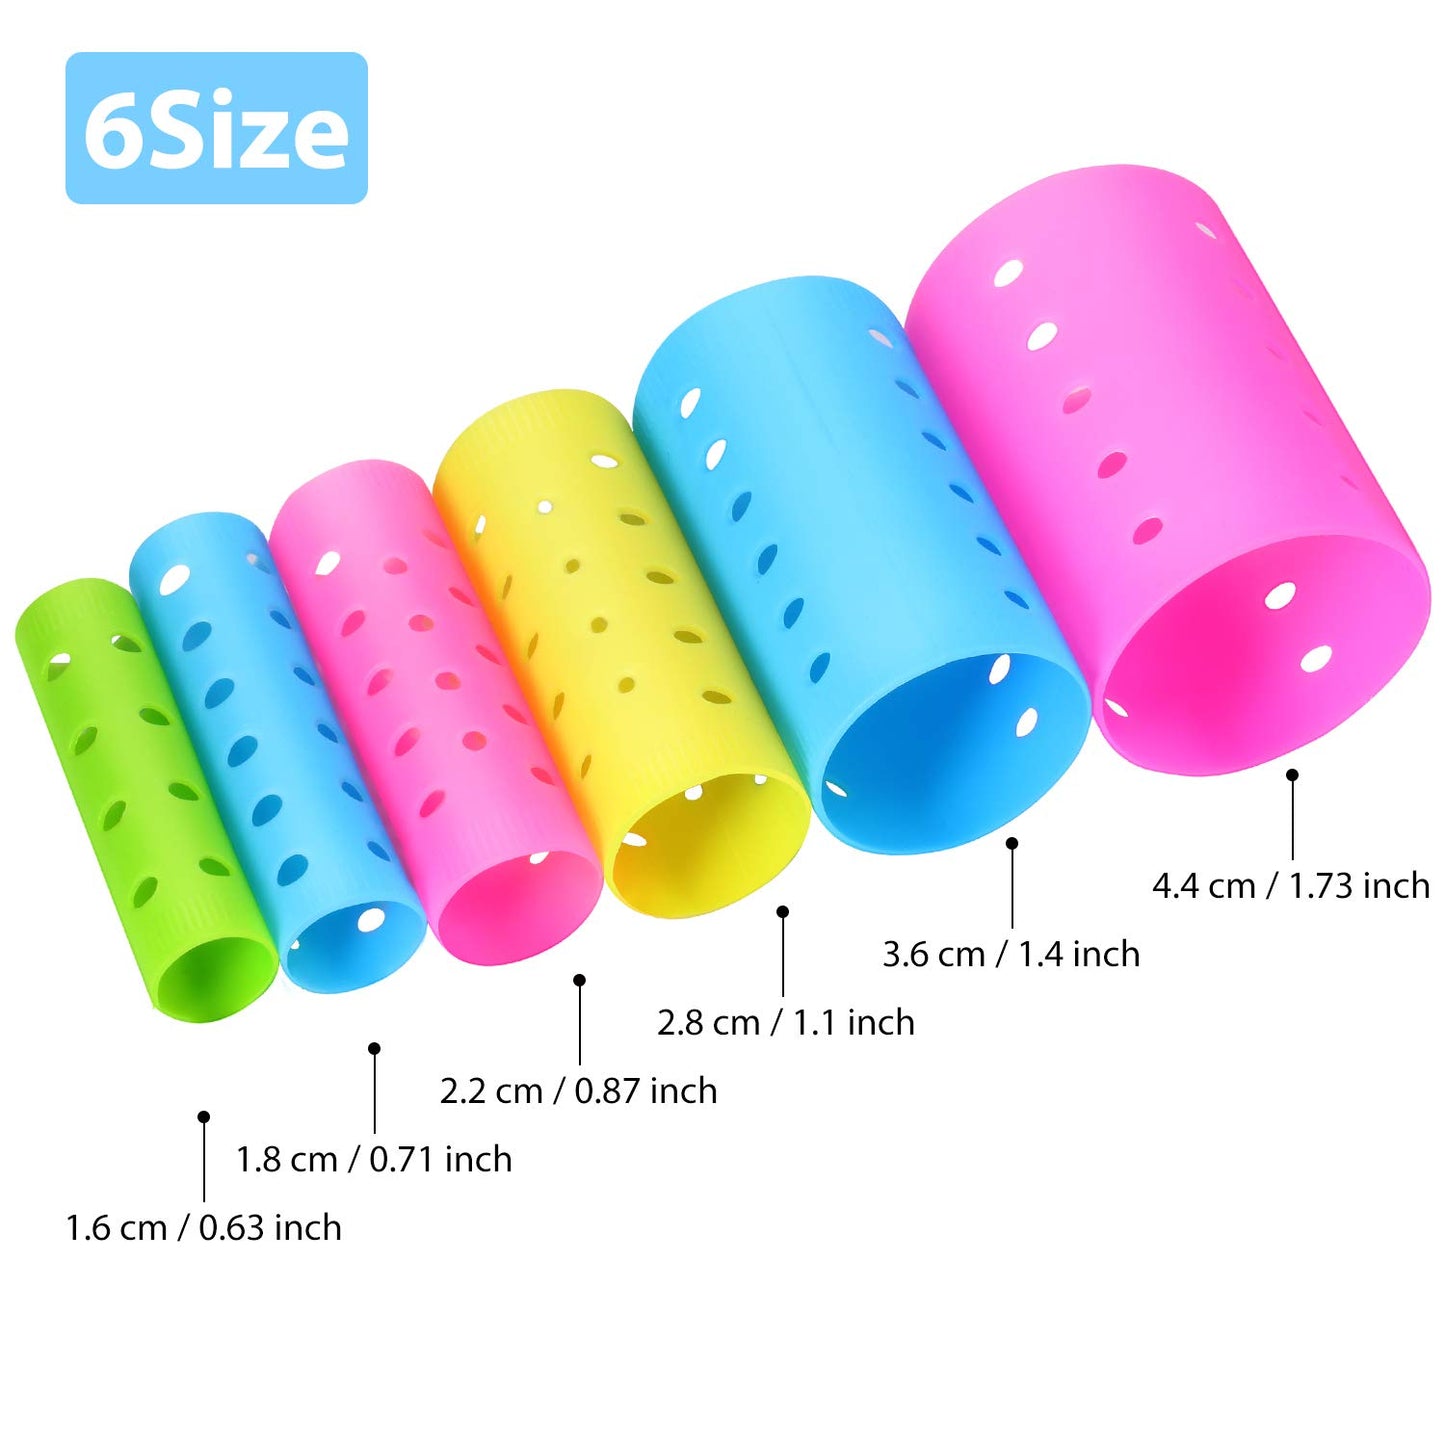 141 Pieces Hair Rollers Set Include 60 Plastic Hair Rollers